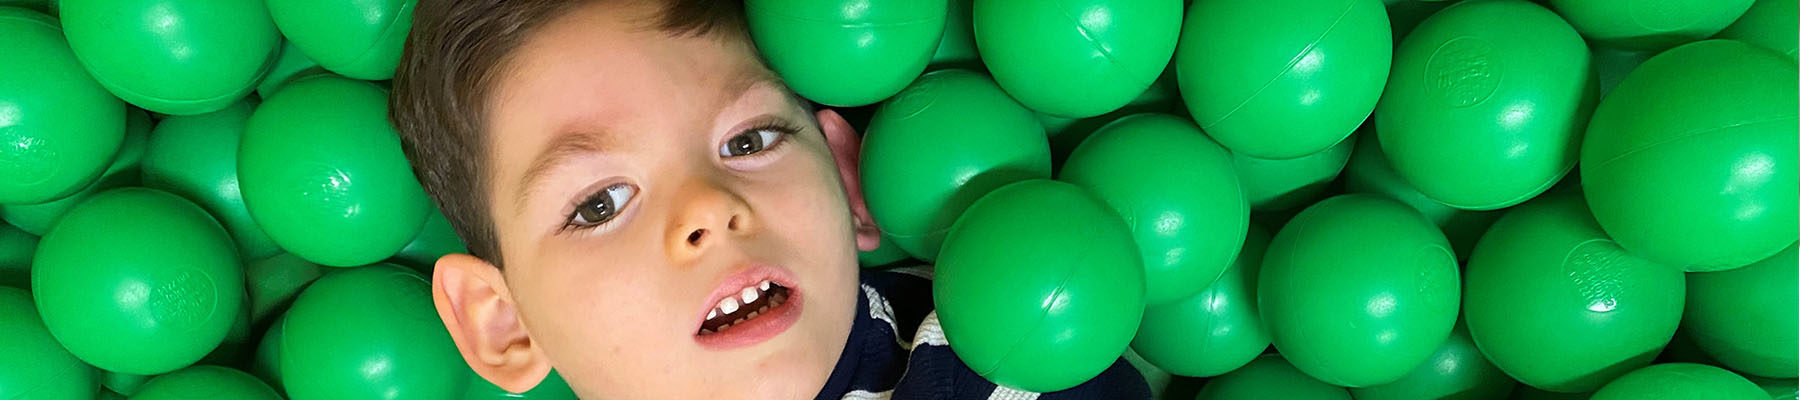 A young boy in a ball pond surrounded by green balls